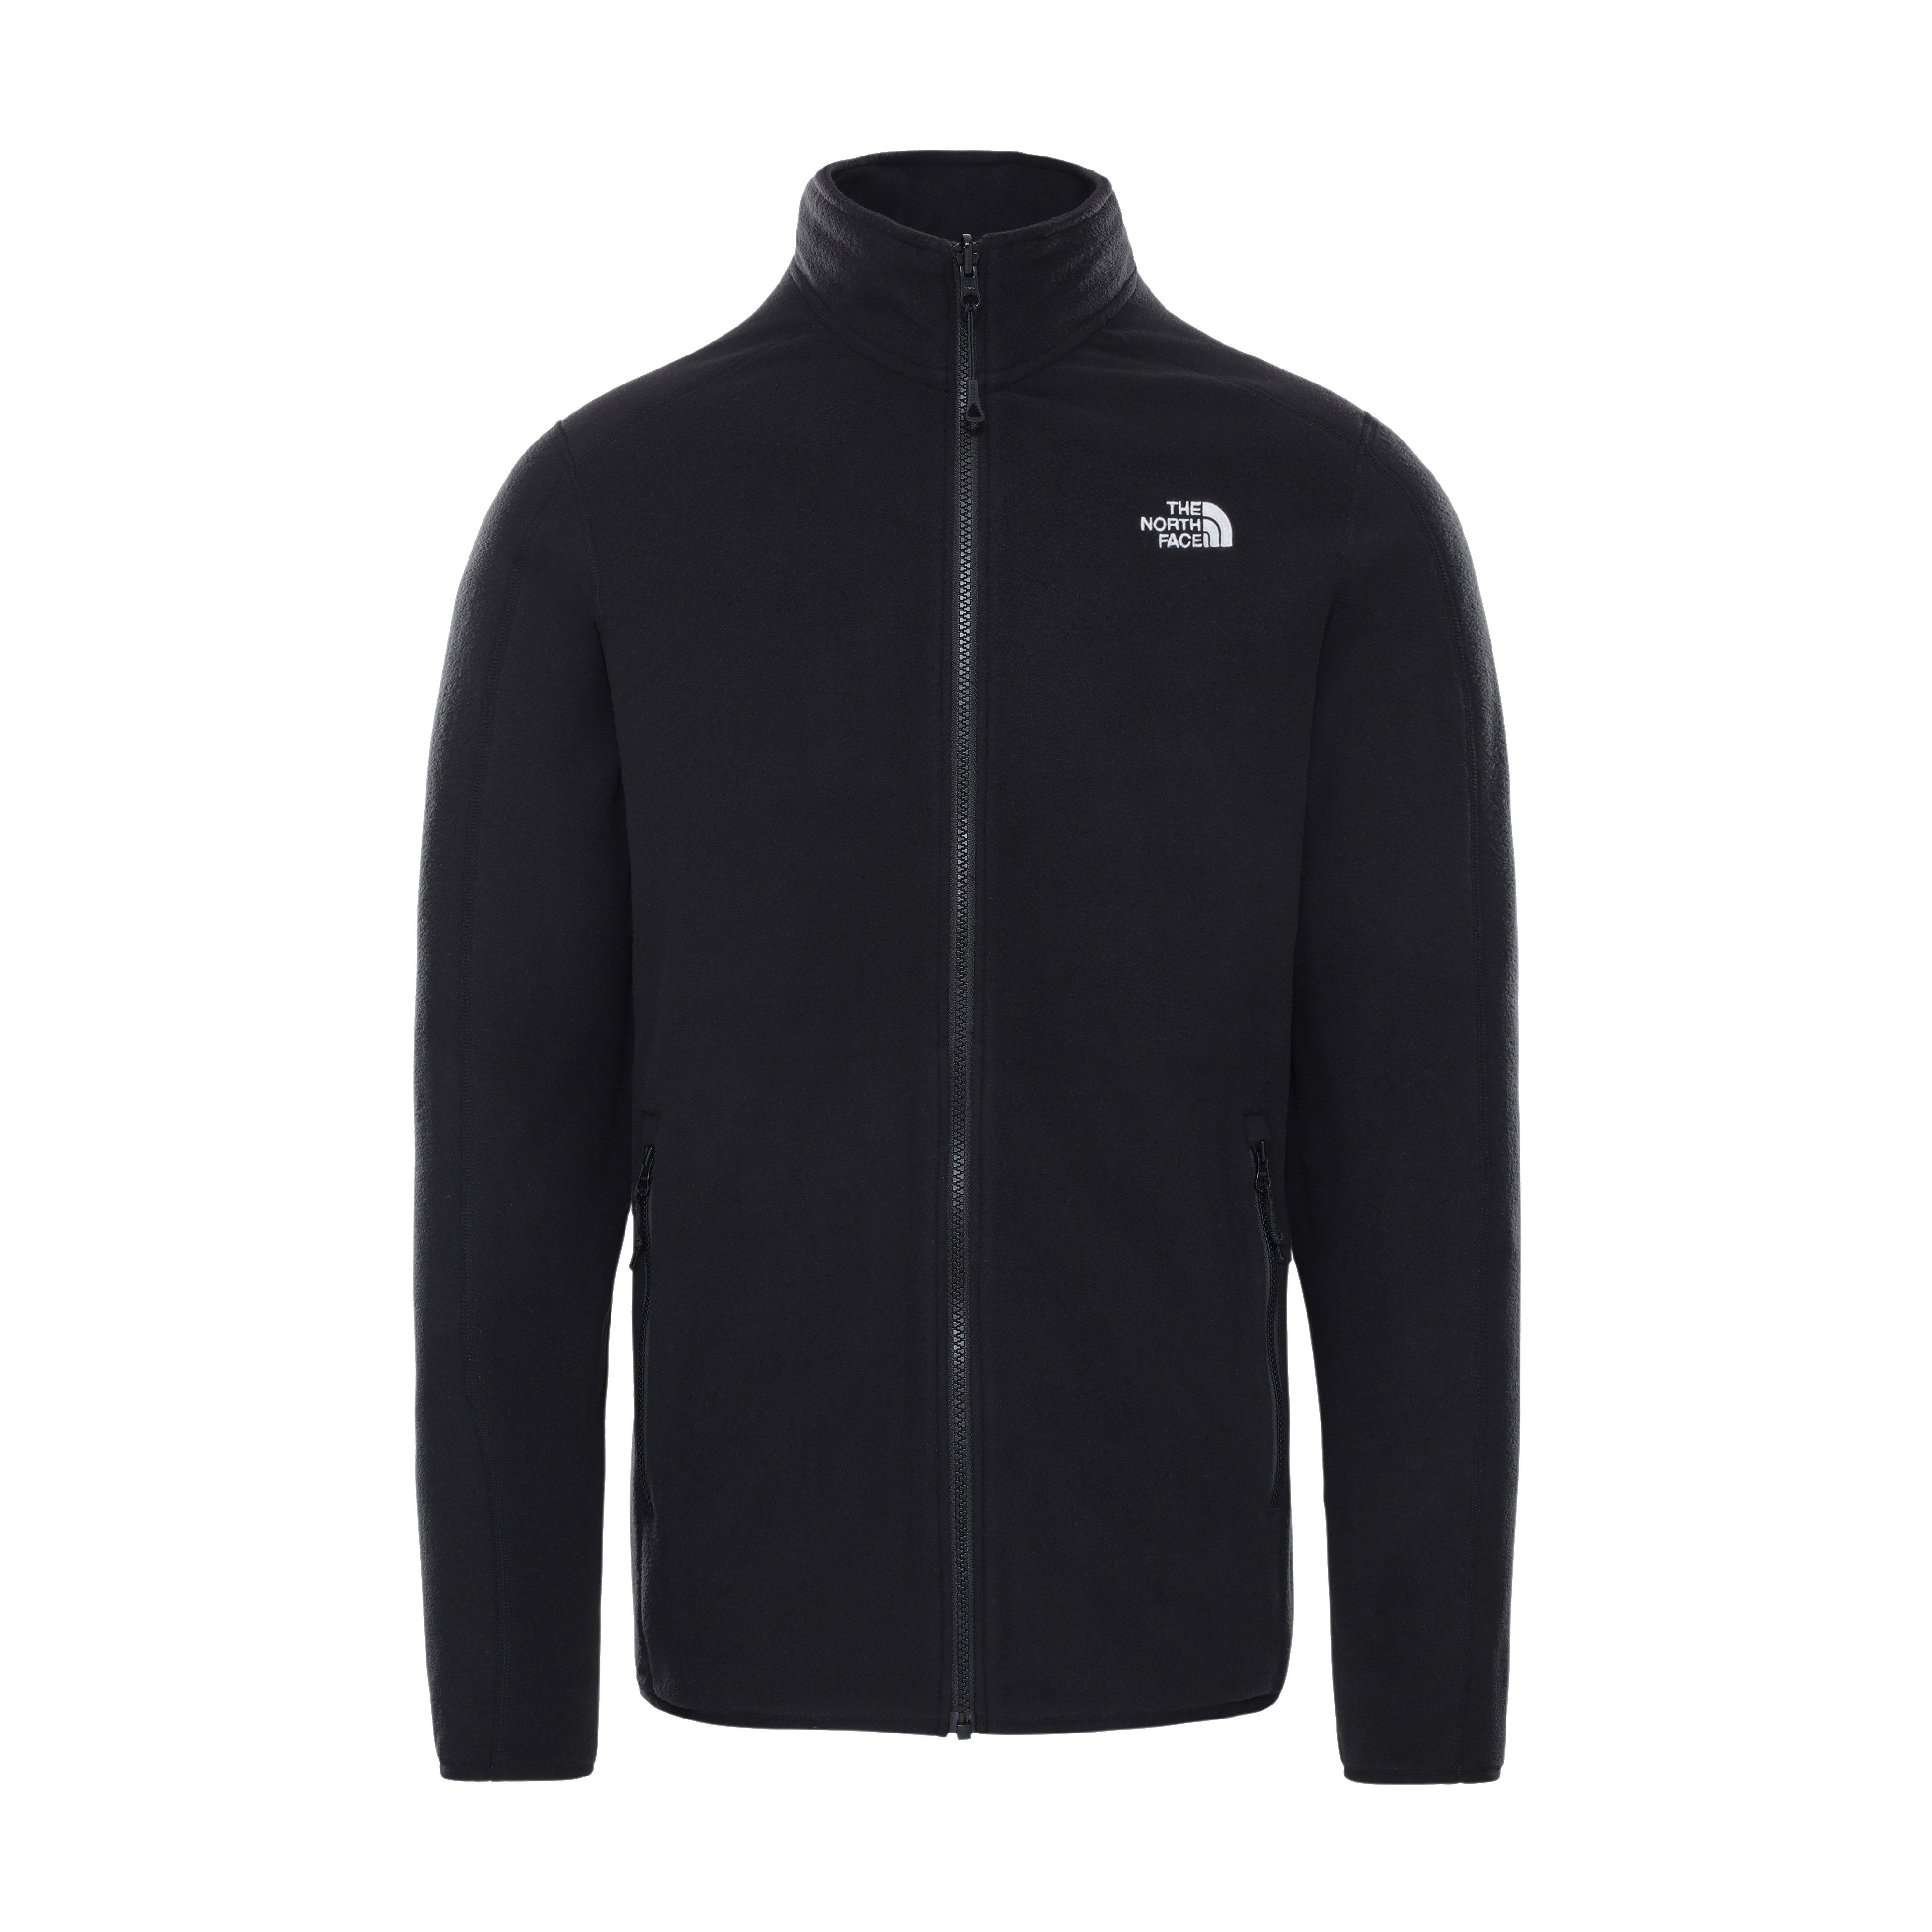 Product brands The North Face | jacketcompare.co.uk